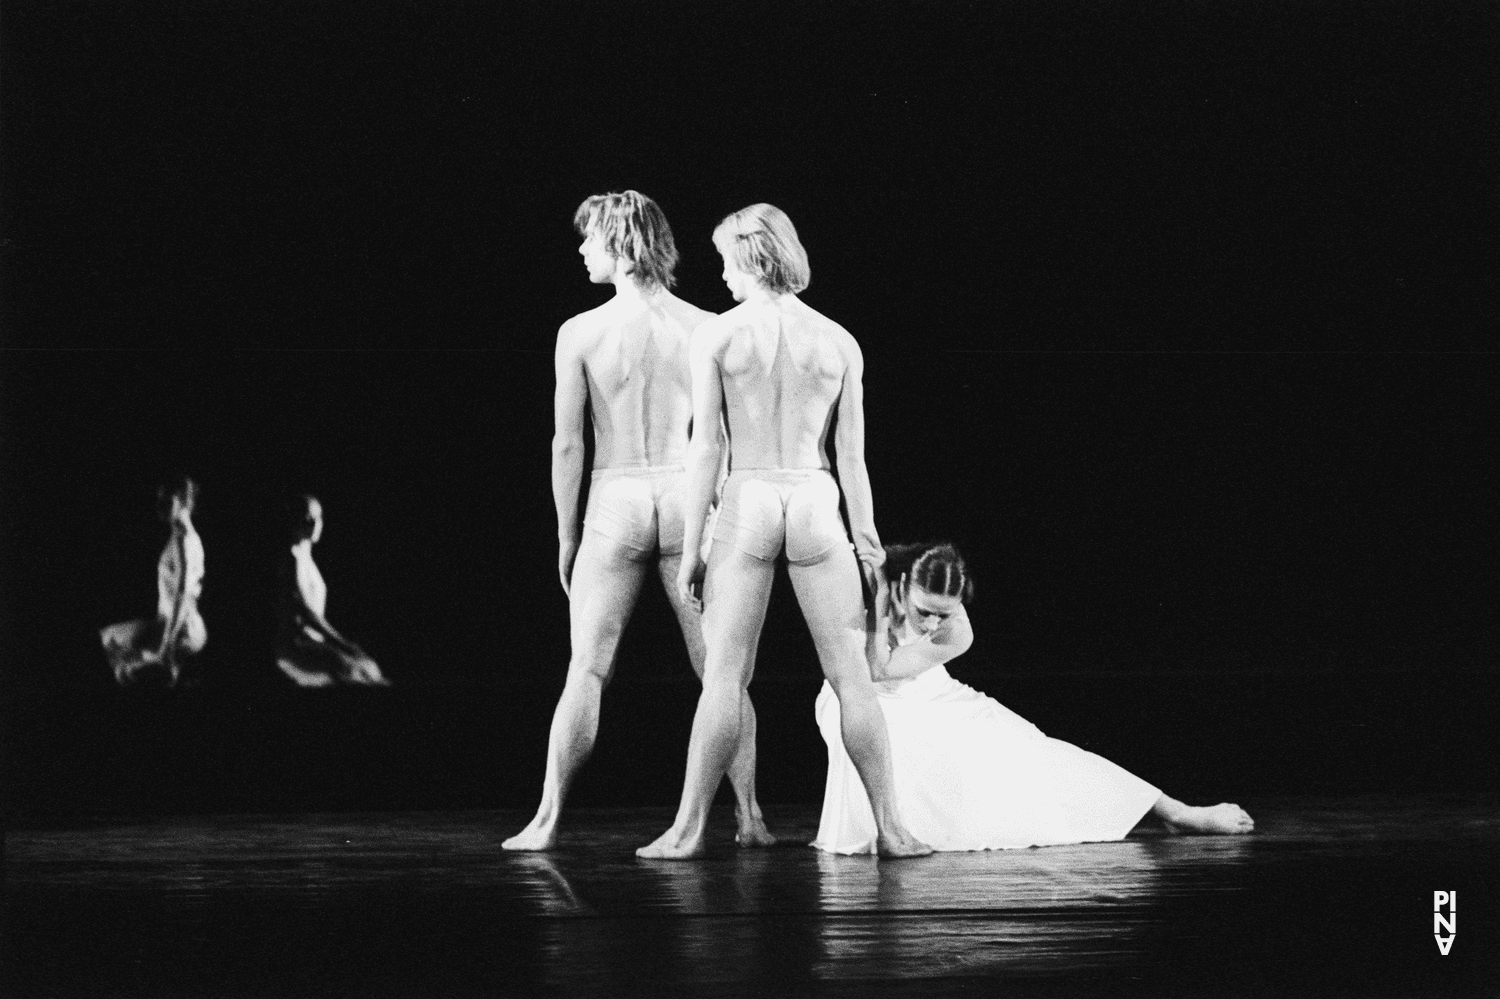 Ed Kortlandt, Dominique Mercy and Malou Airaudo in “Iphigenie auf Tauris” by Pina Bausch at Opernhaus Wuppertal, season 1973/74